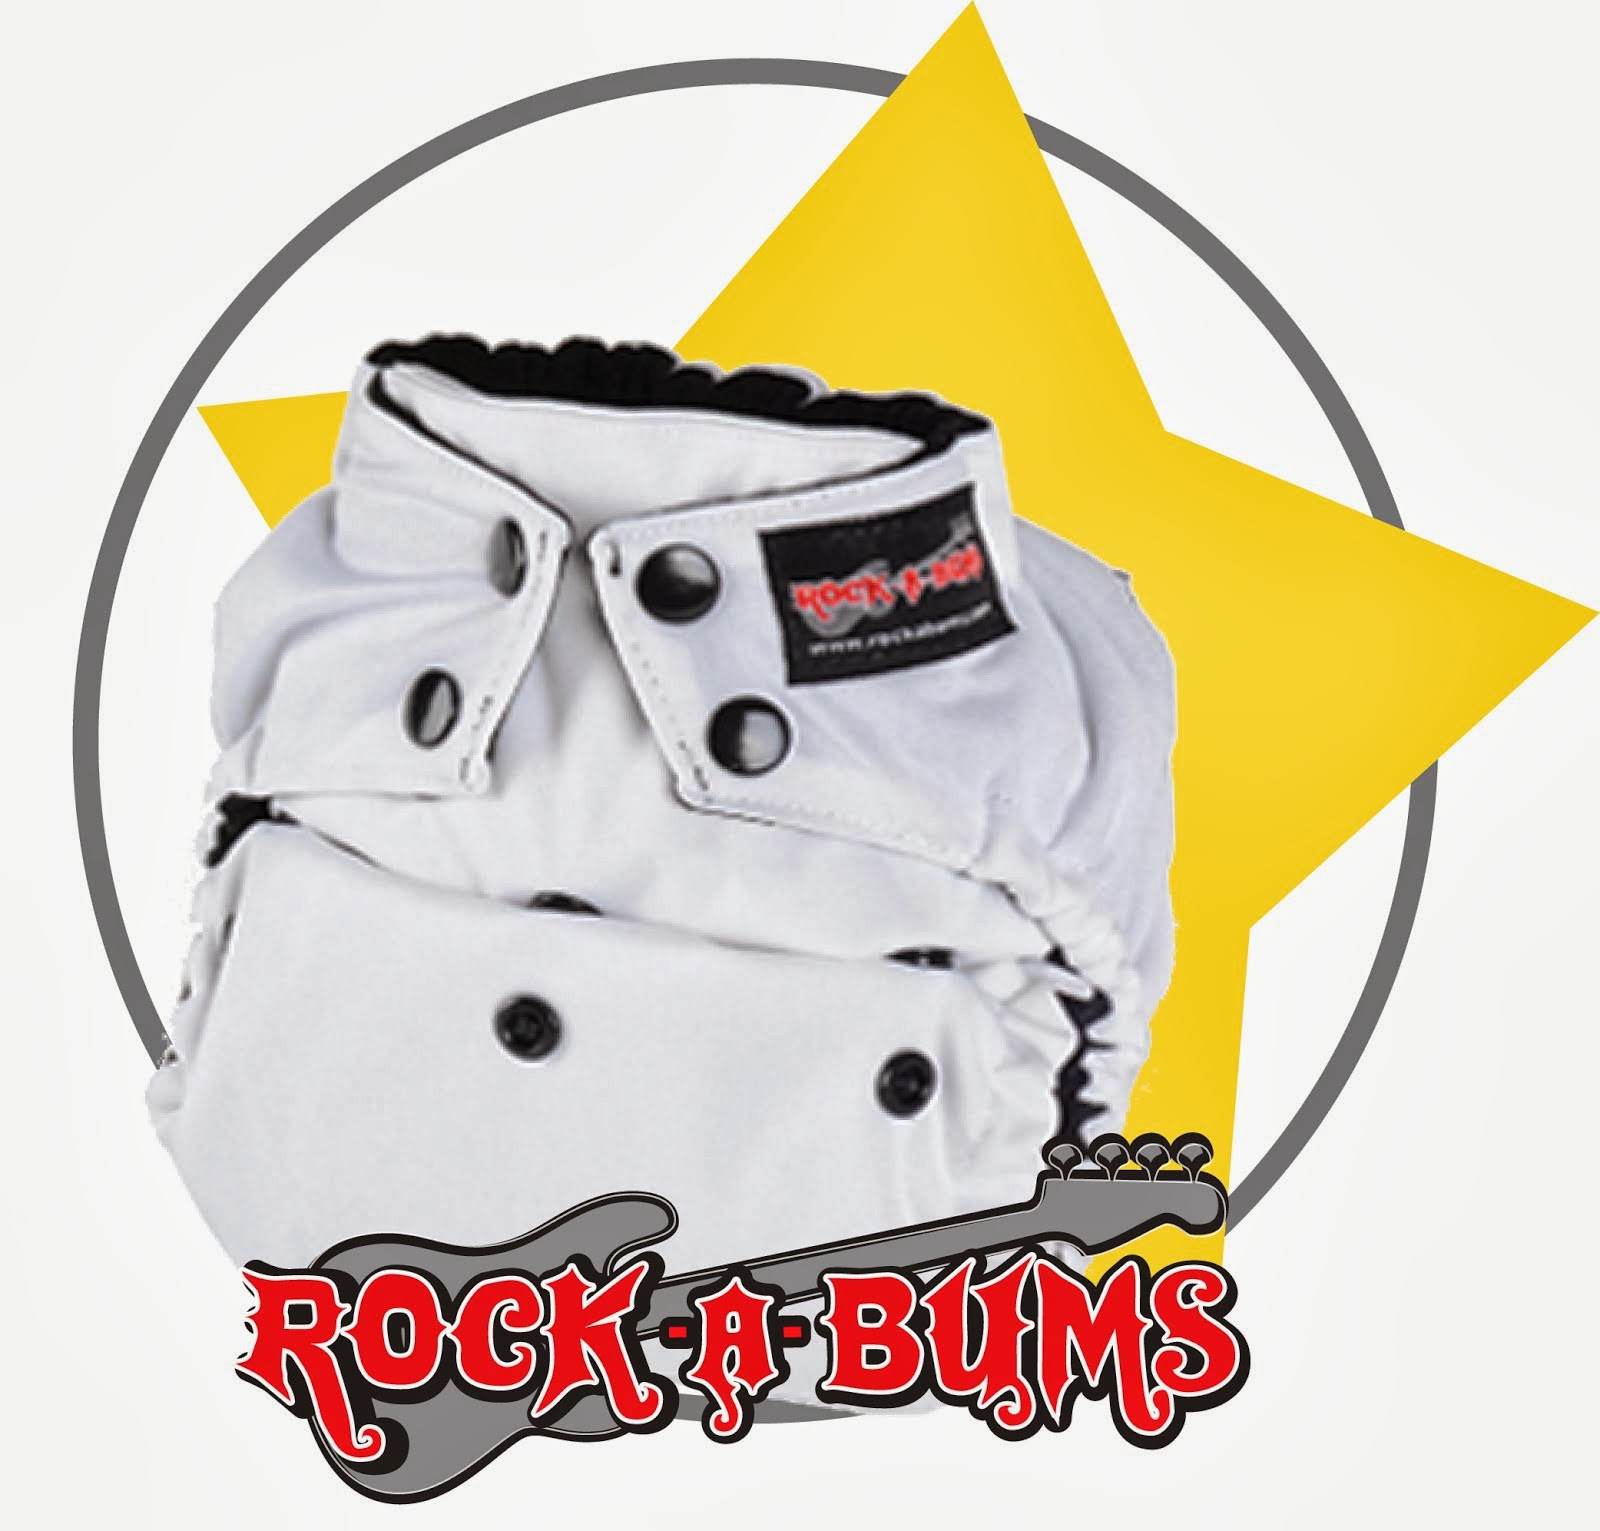 Order Rock-A-Bums here: